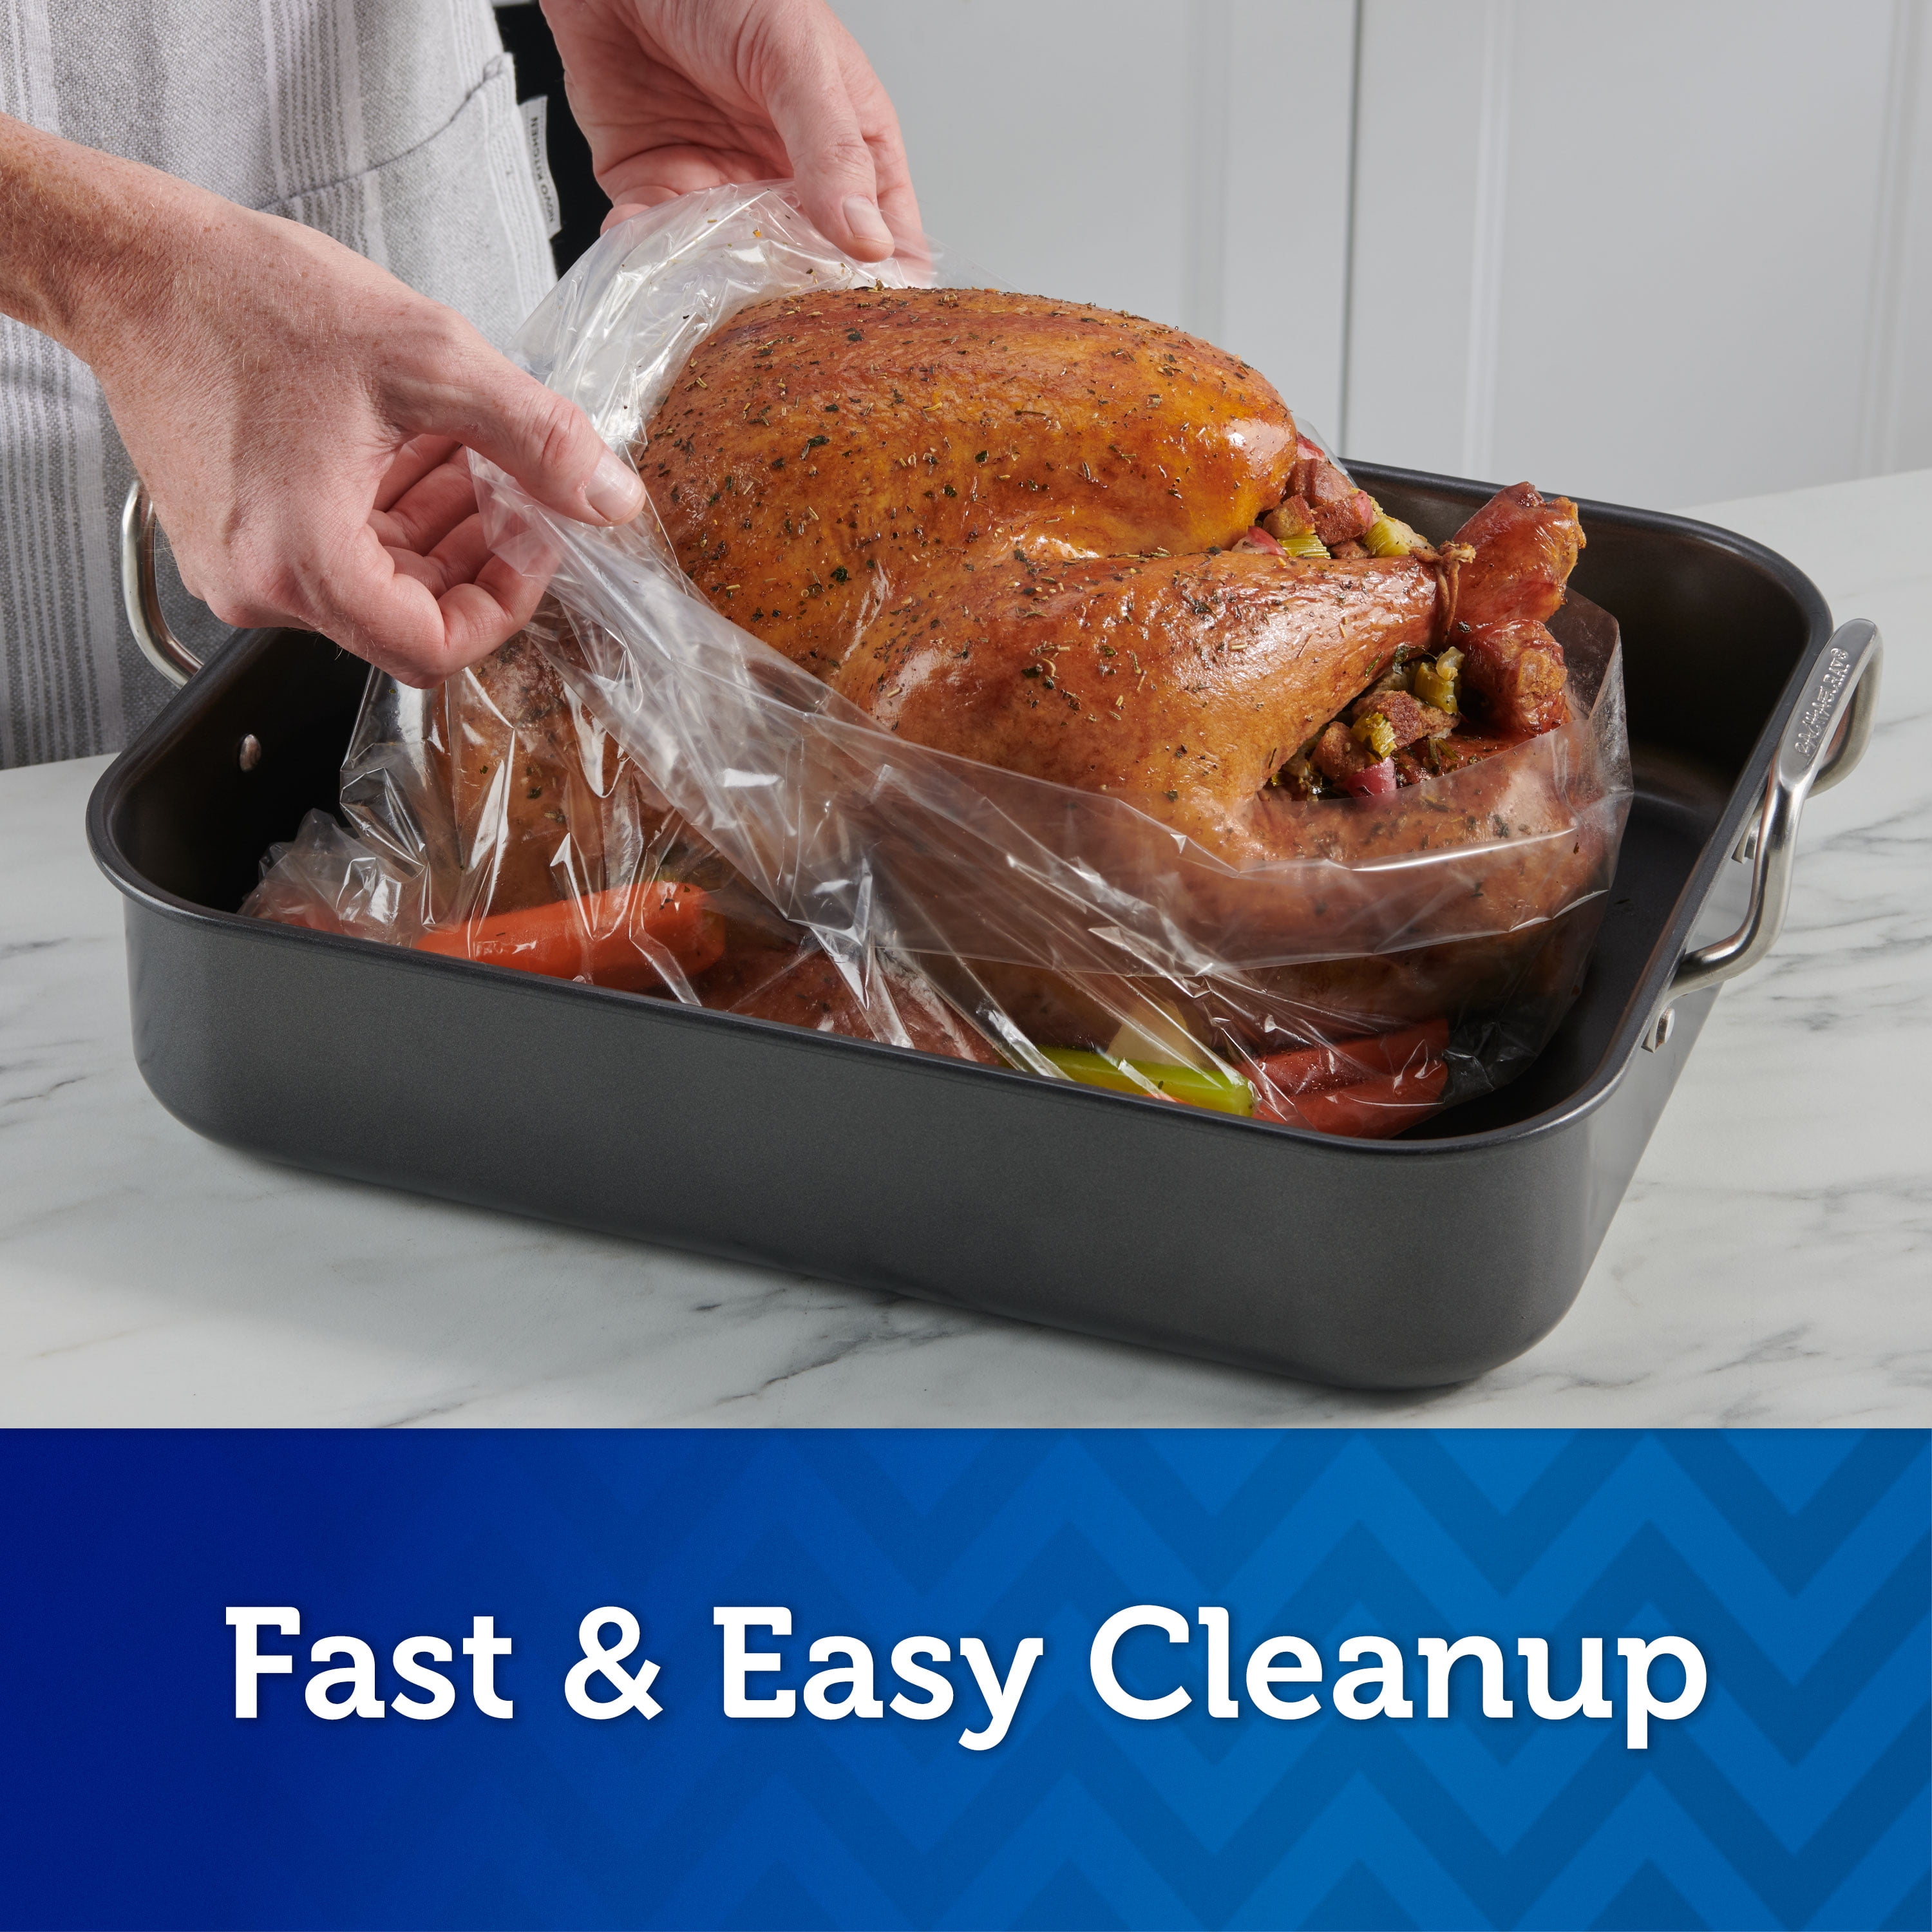 Our Family Oven Bags, Turkey Size 2 ea